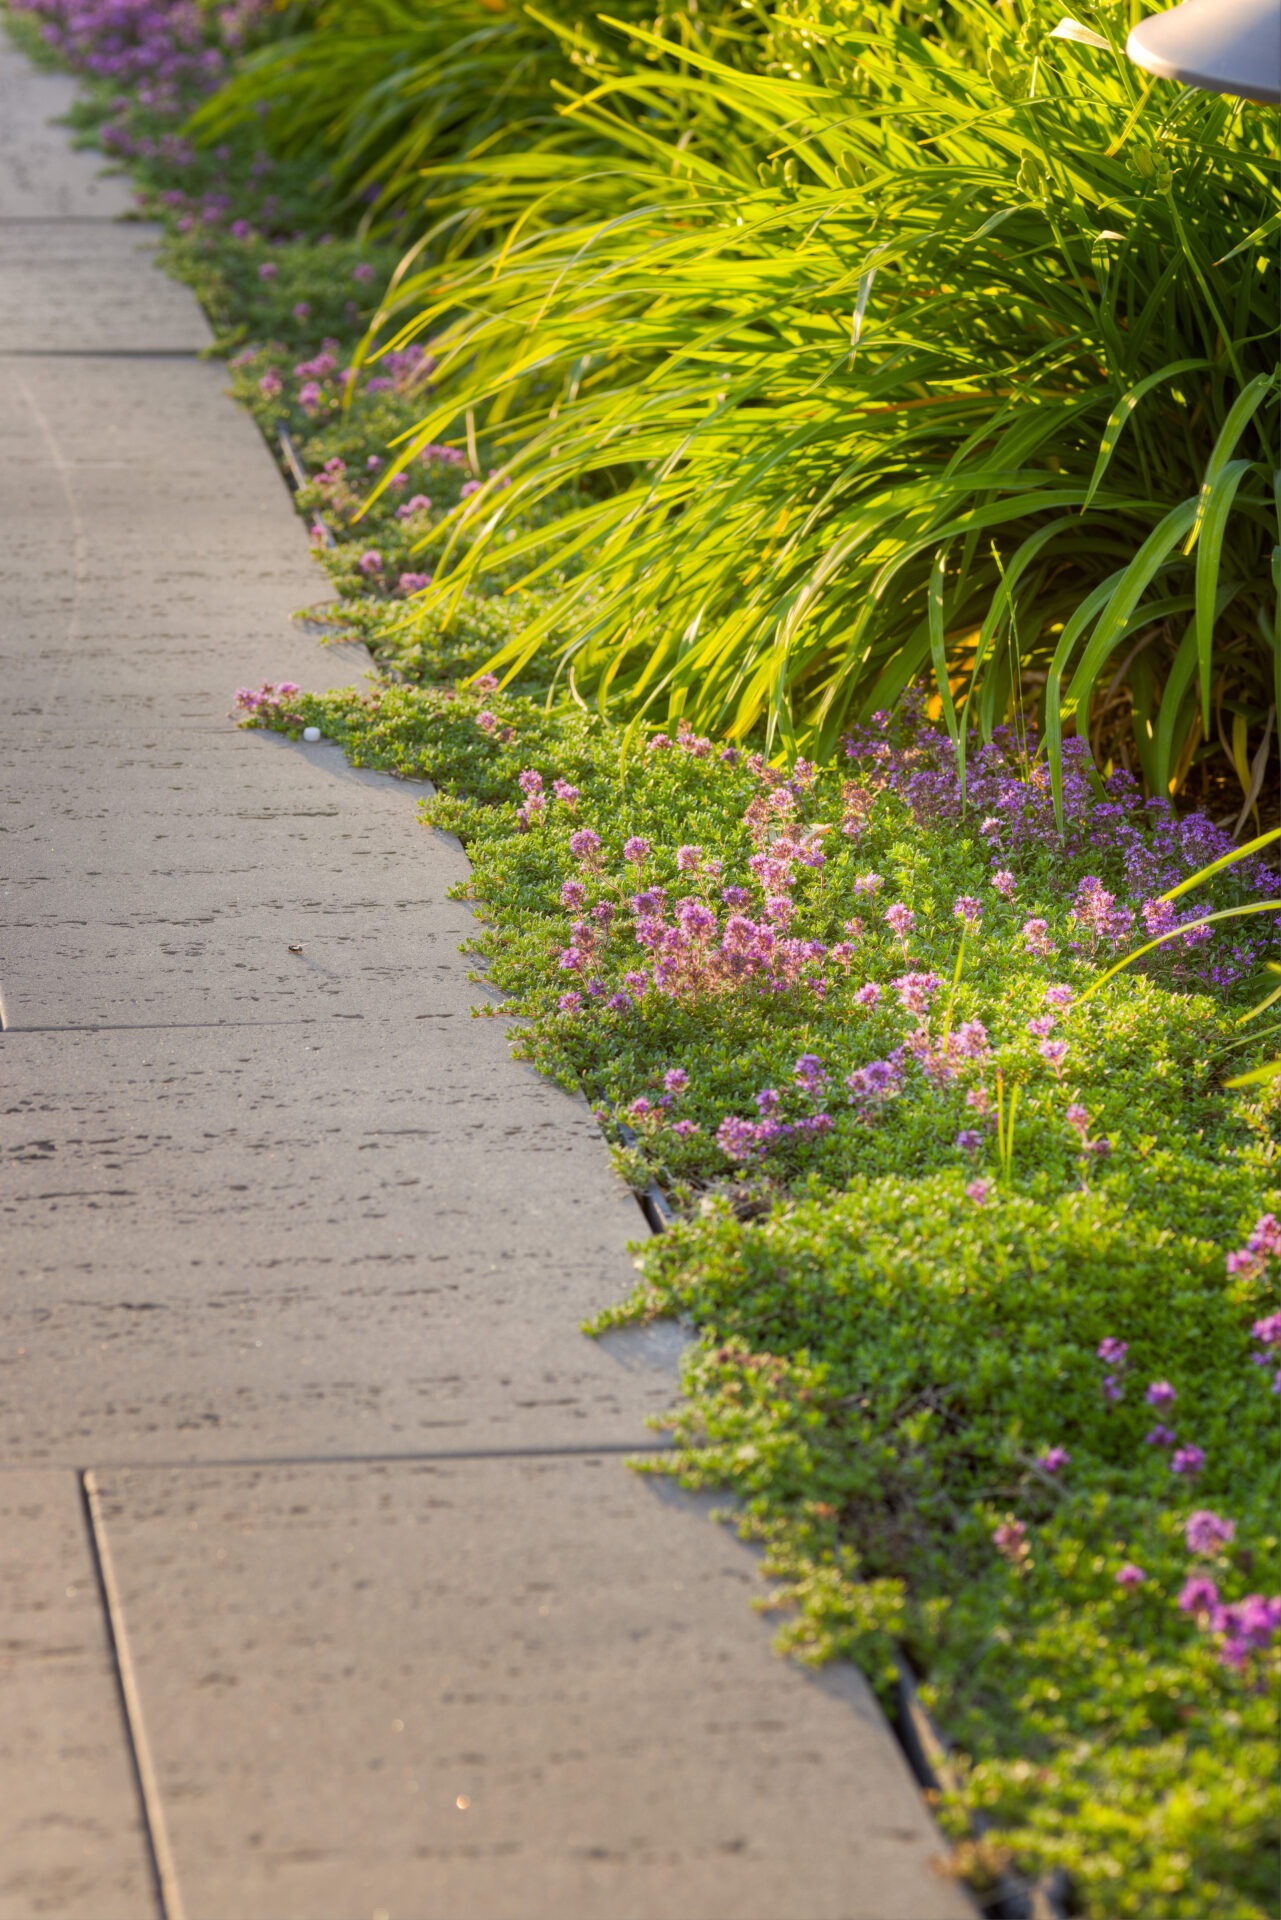 A concrete path with green and purple flowering plants along the edge in sunlit conditions, portraying a tranquil, manicured garden scene.